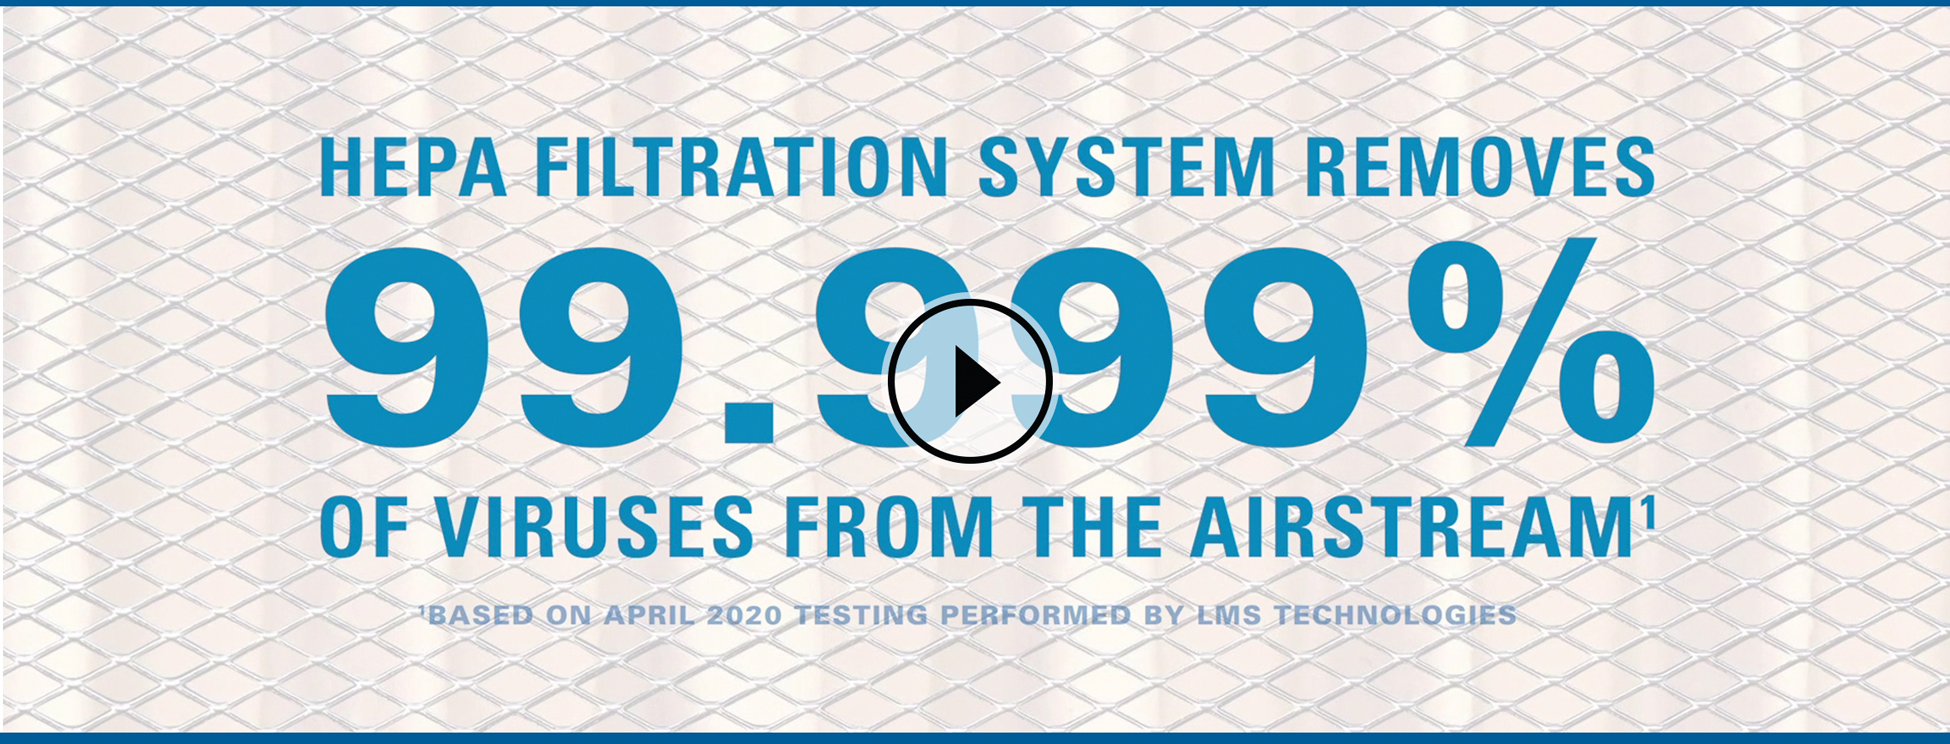 HEPA Filtration Video Pause Screen. Click to Play.